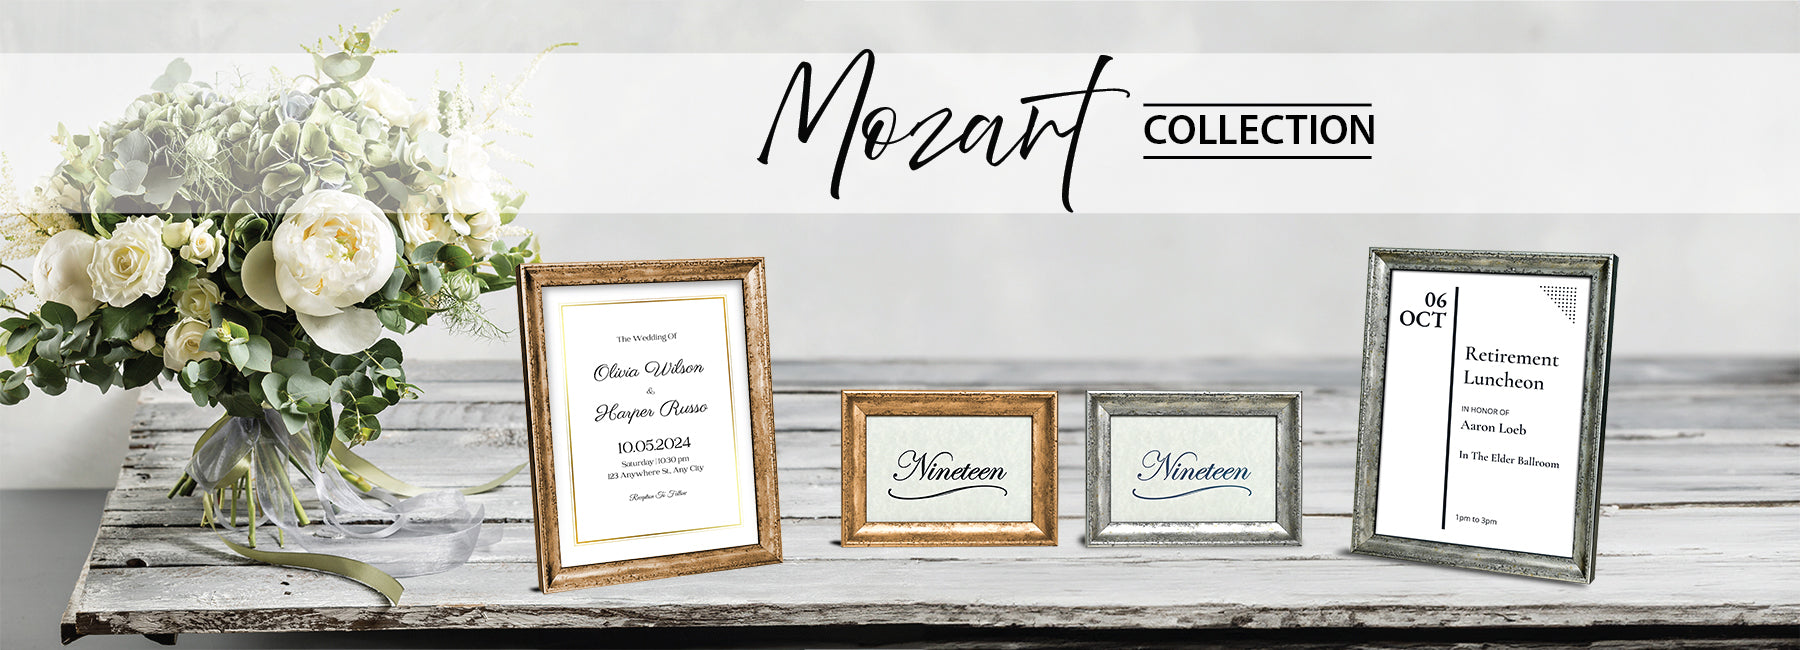 Mozart Collection